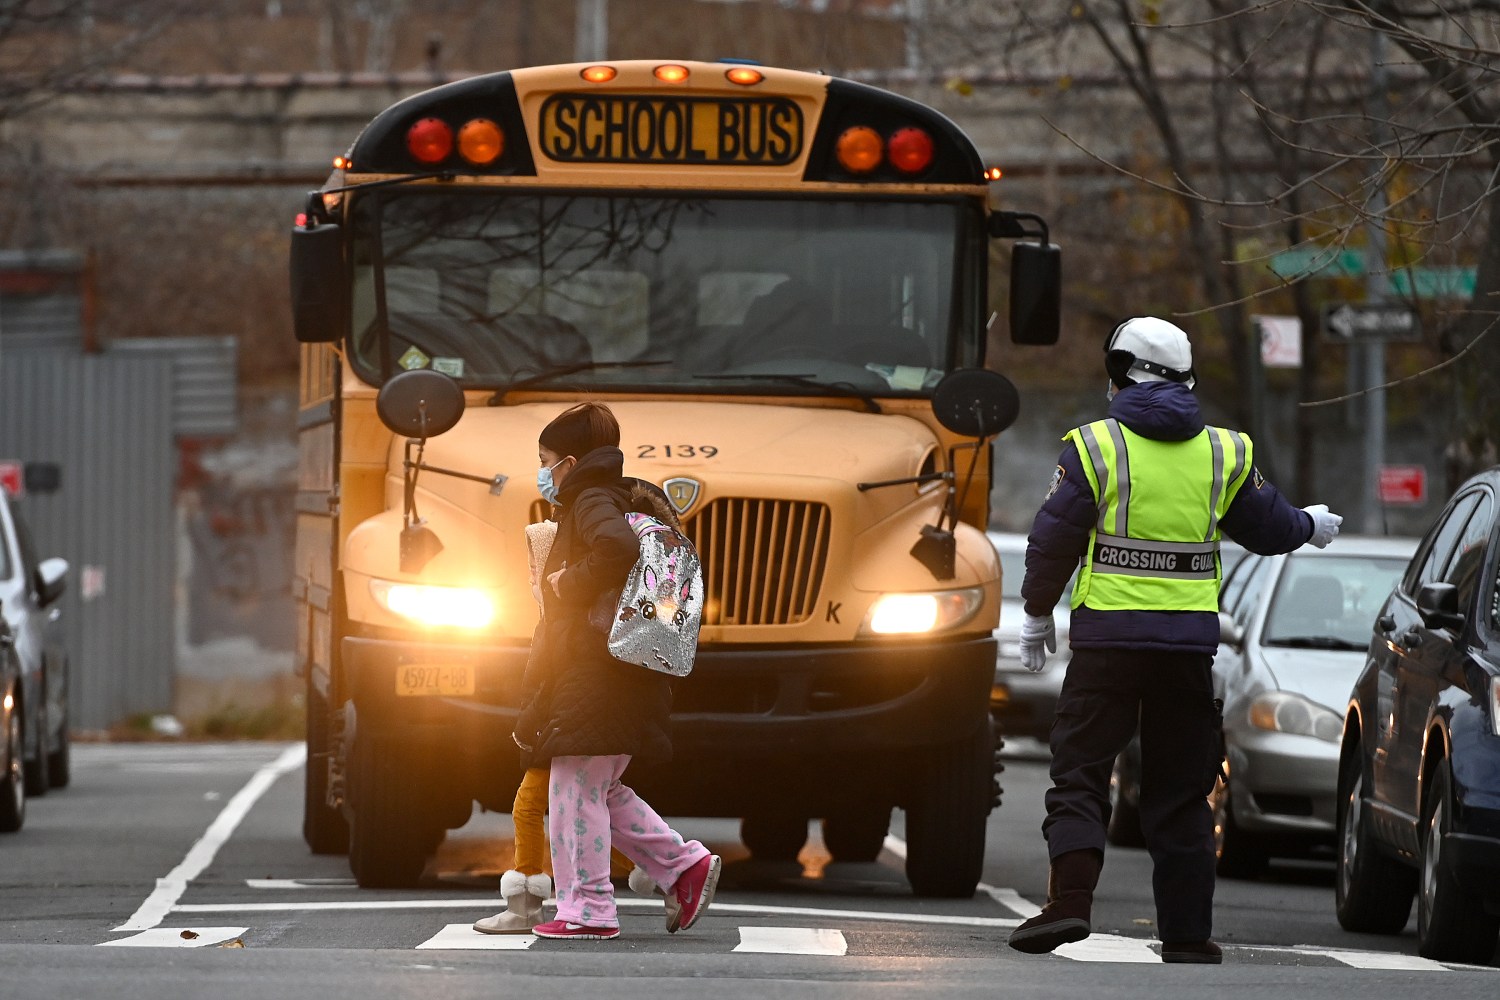 A school crossing guard holds a bus as a woman and child cross the street towards Public school 7 Louis F. Simeone in the Queens borough of New York, NY, December 8,  2020. New York City Mayor Bill de Blasio announced that public pre-K and elementary schools can return to in-person learning on Dec. 7., while middle and high schools remain closed; Schools were closed on Nov. 18 when the city surpassed the 3% infection rate threshold set by the Mayor de Blasio. (Photo by Anthony Behar/Sipa USA)No Use UK. No Use Germany.